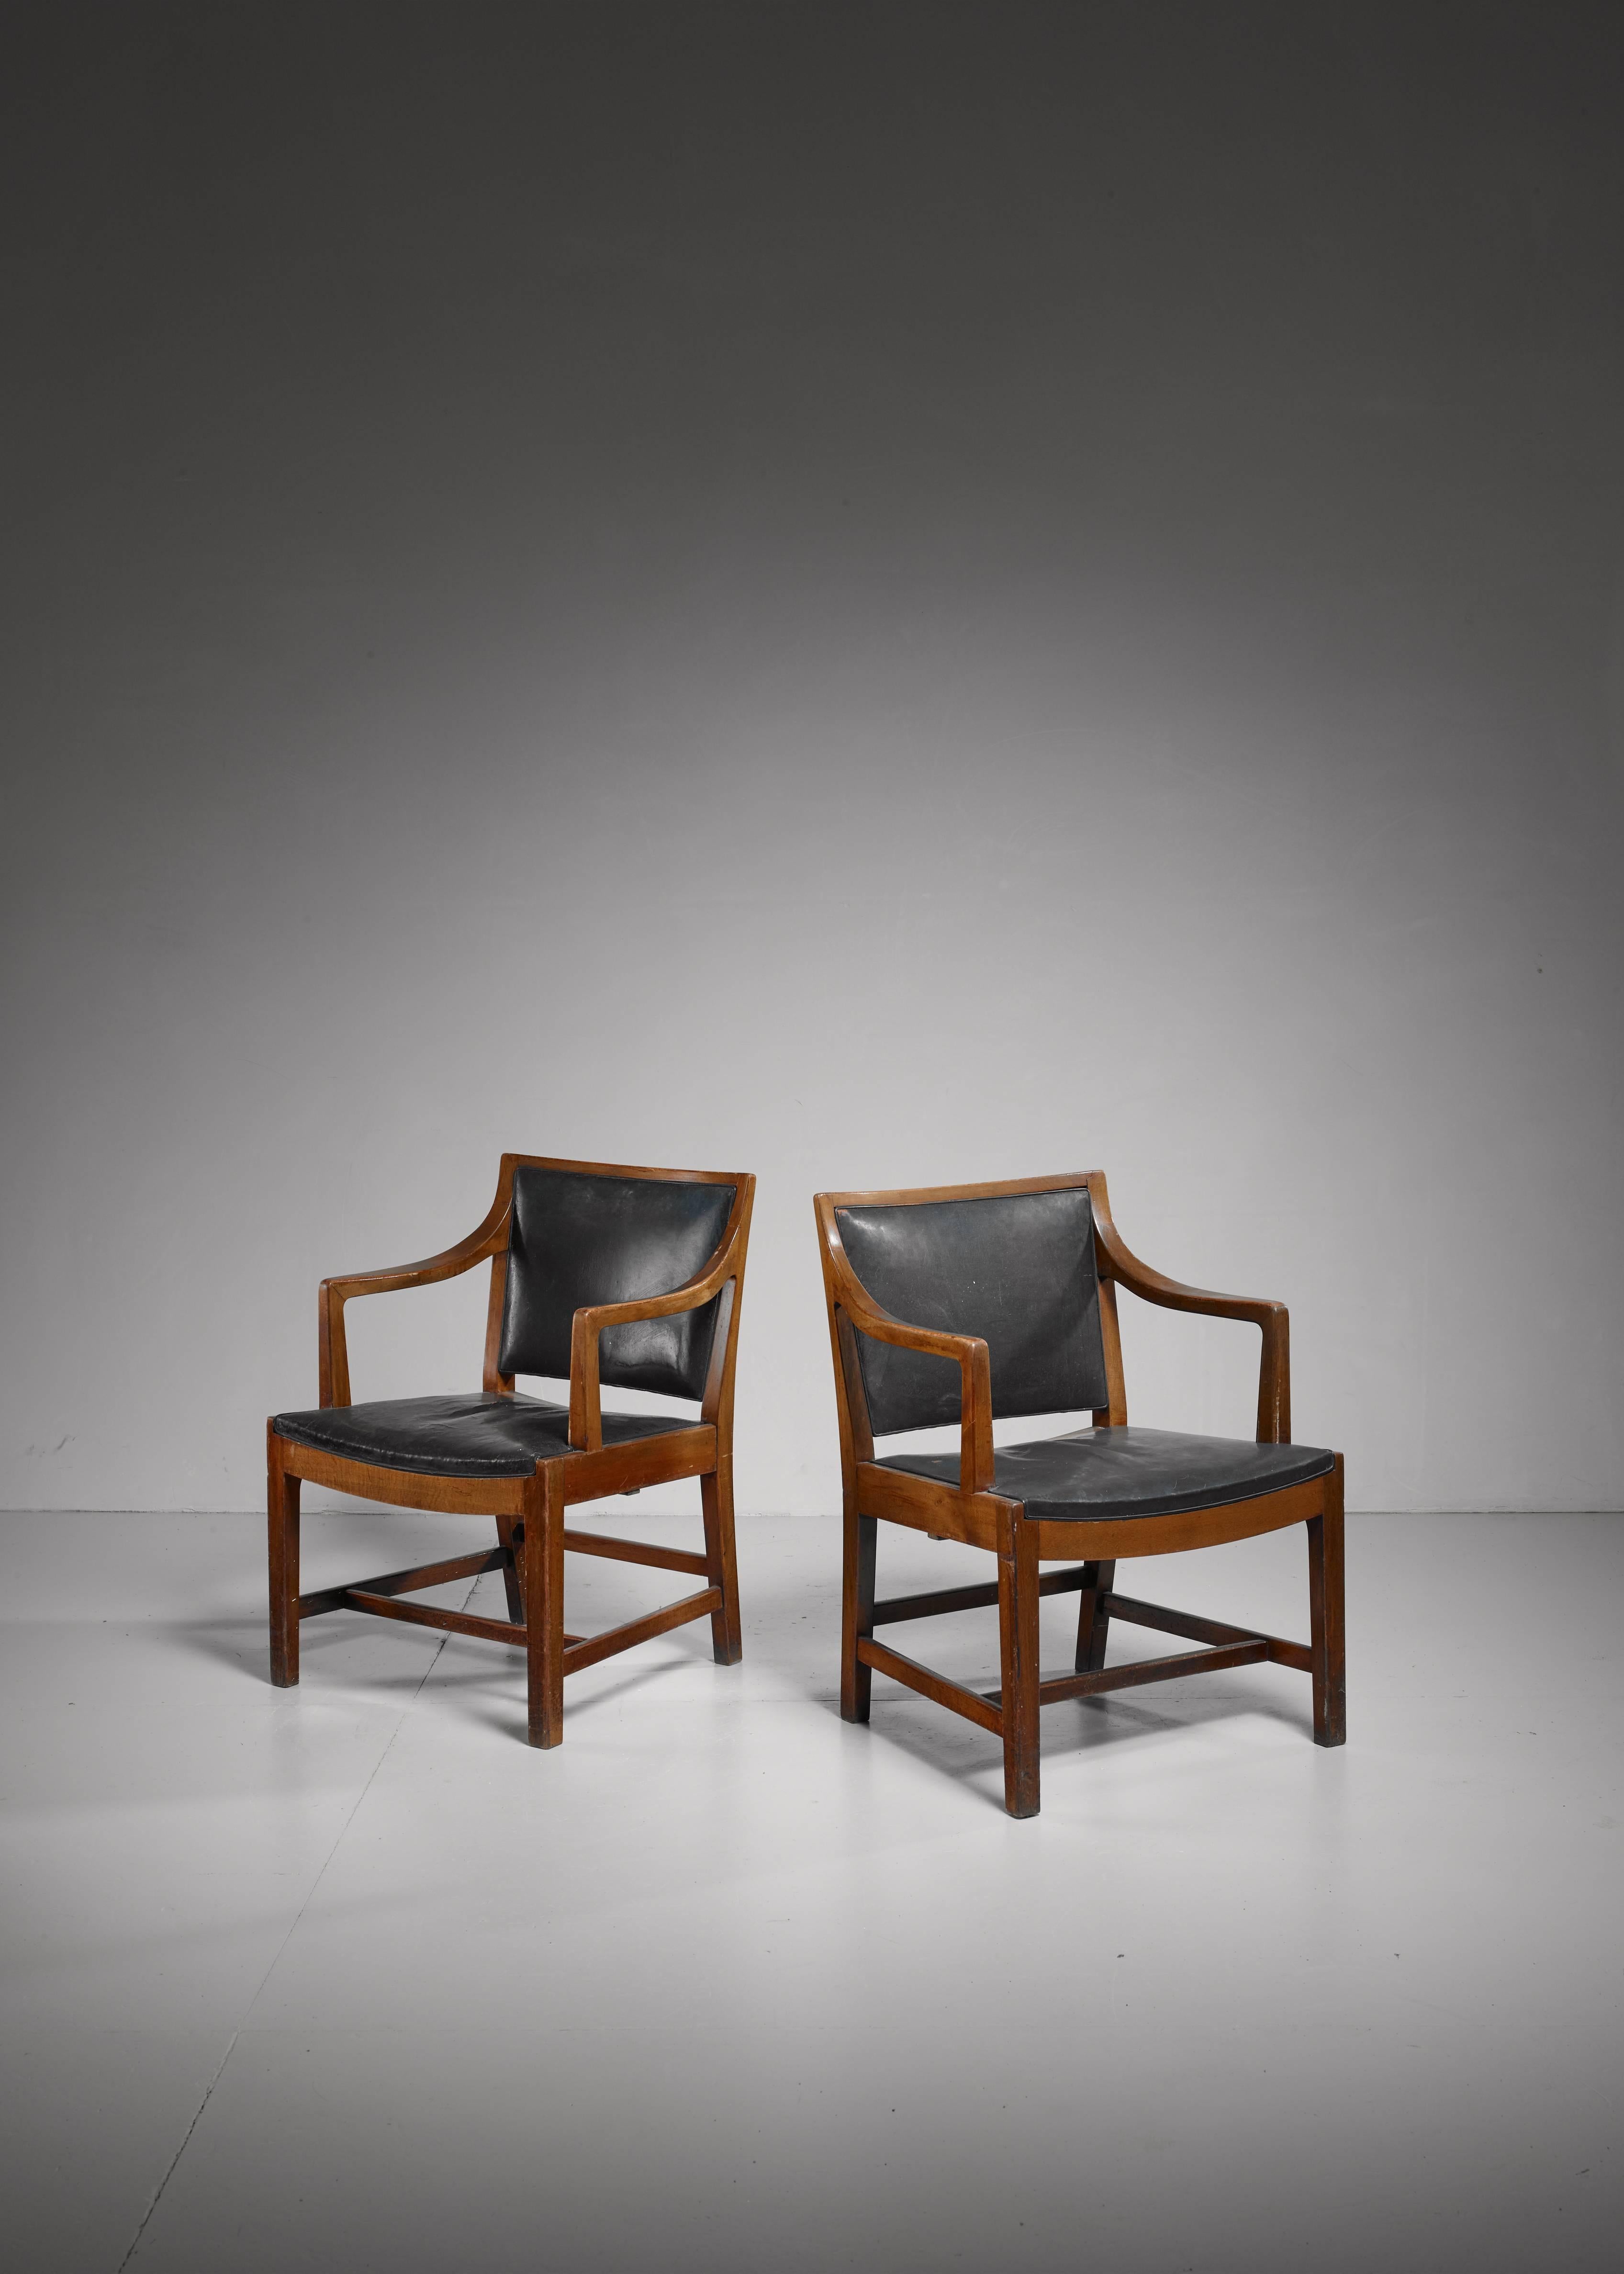 A rare pair of armchairs made of stained beech, upholstered with a dark green leather. These chairs were designed for and used on the Kronprins Frederik ferry (built 1941), which was furnished by Fisker. The model was later also used on the Kong